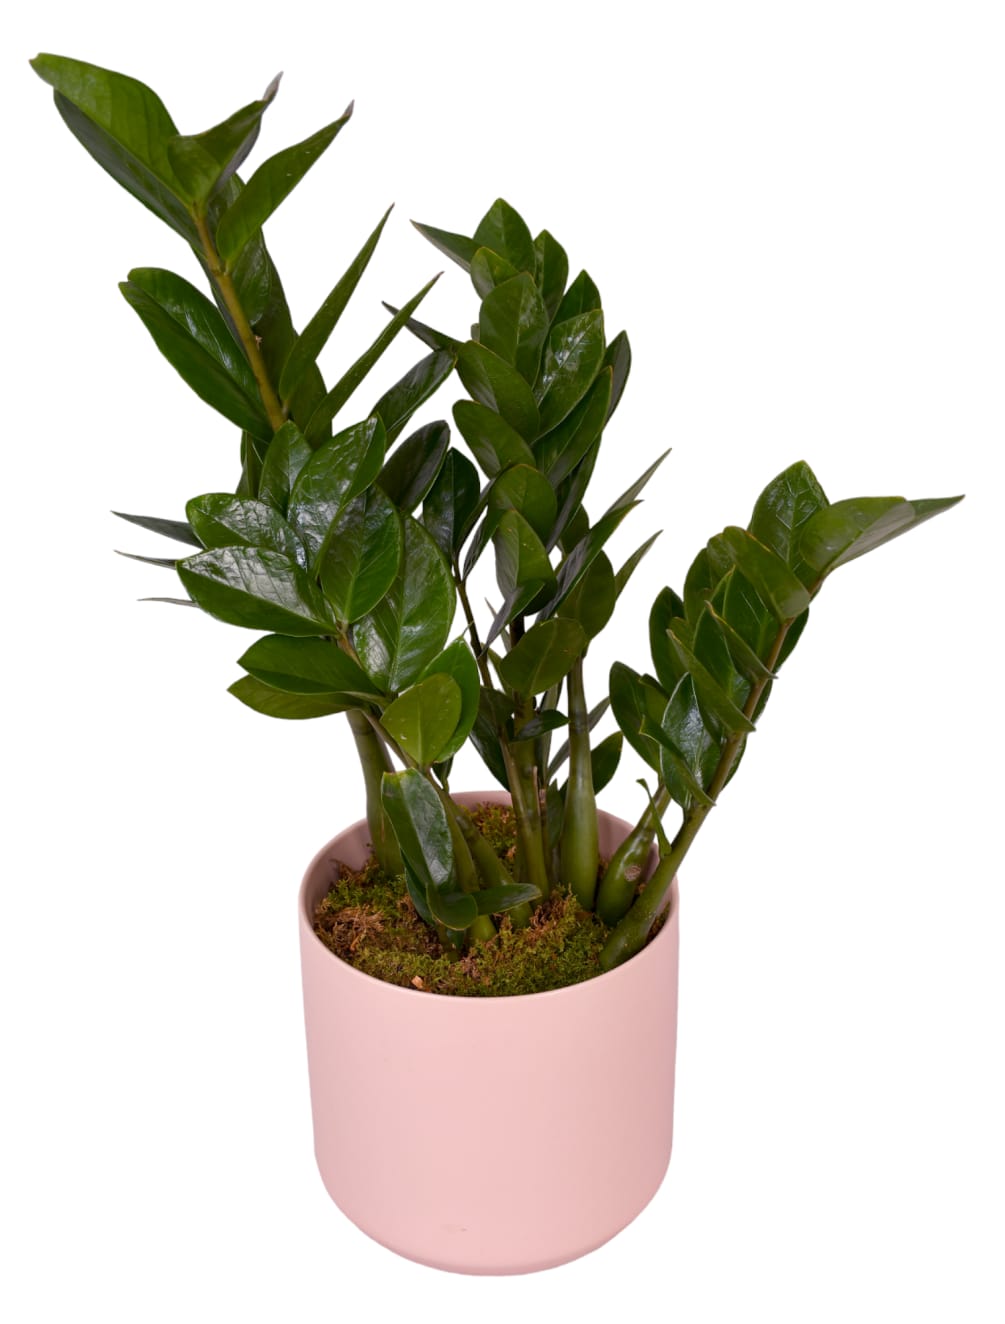 7 inches pot. The ZZ Plant is characterized by its waxy green